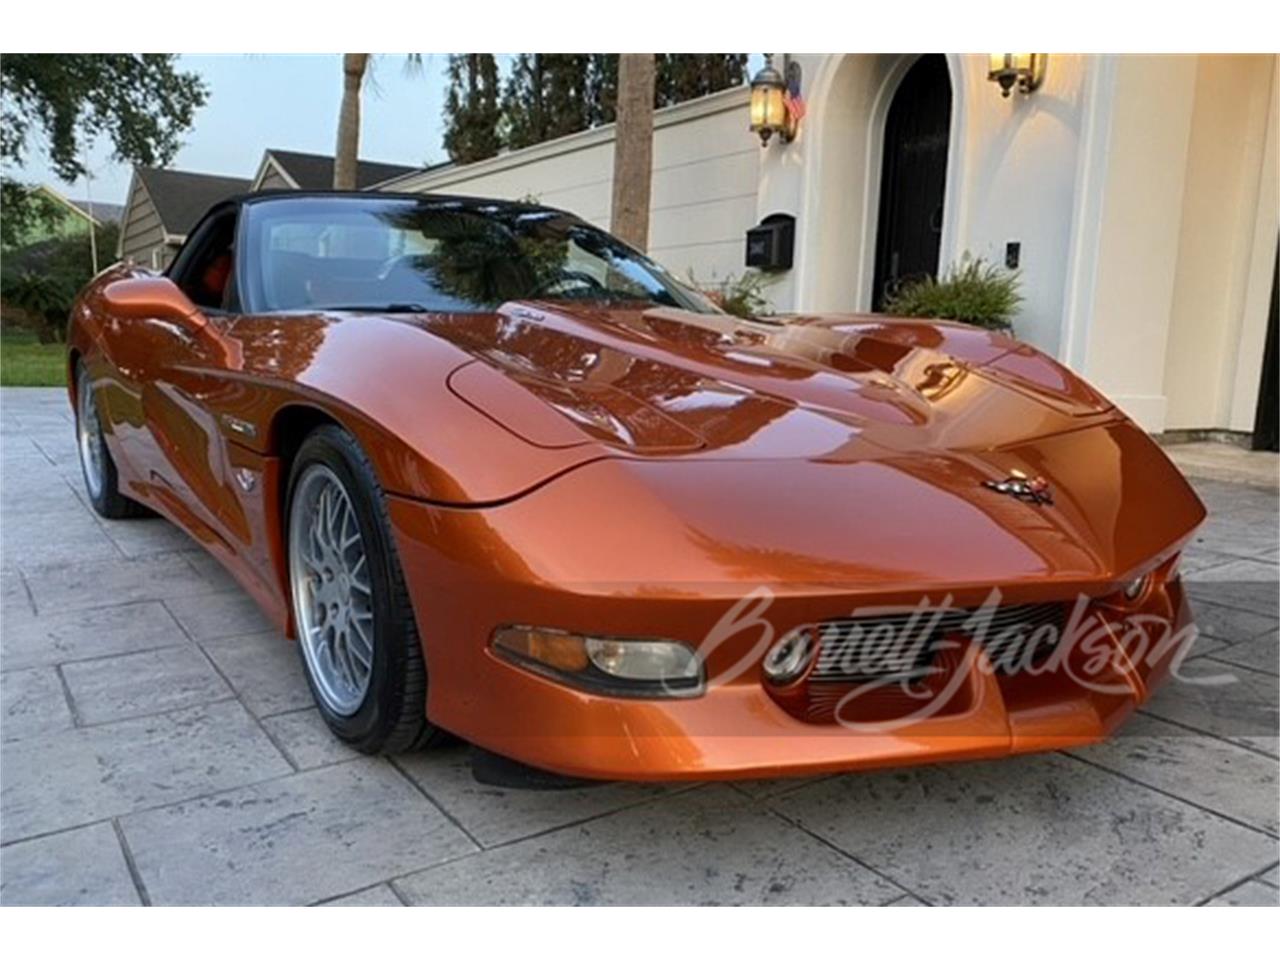 For Sale at Auction: 2000 Chevrolet Corvette in Scottsdale, Arizona for sale in Scottsdale, AZ